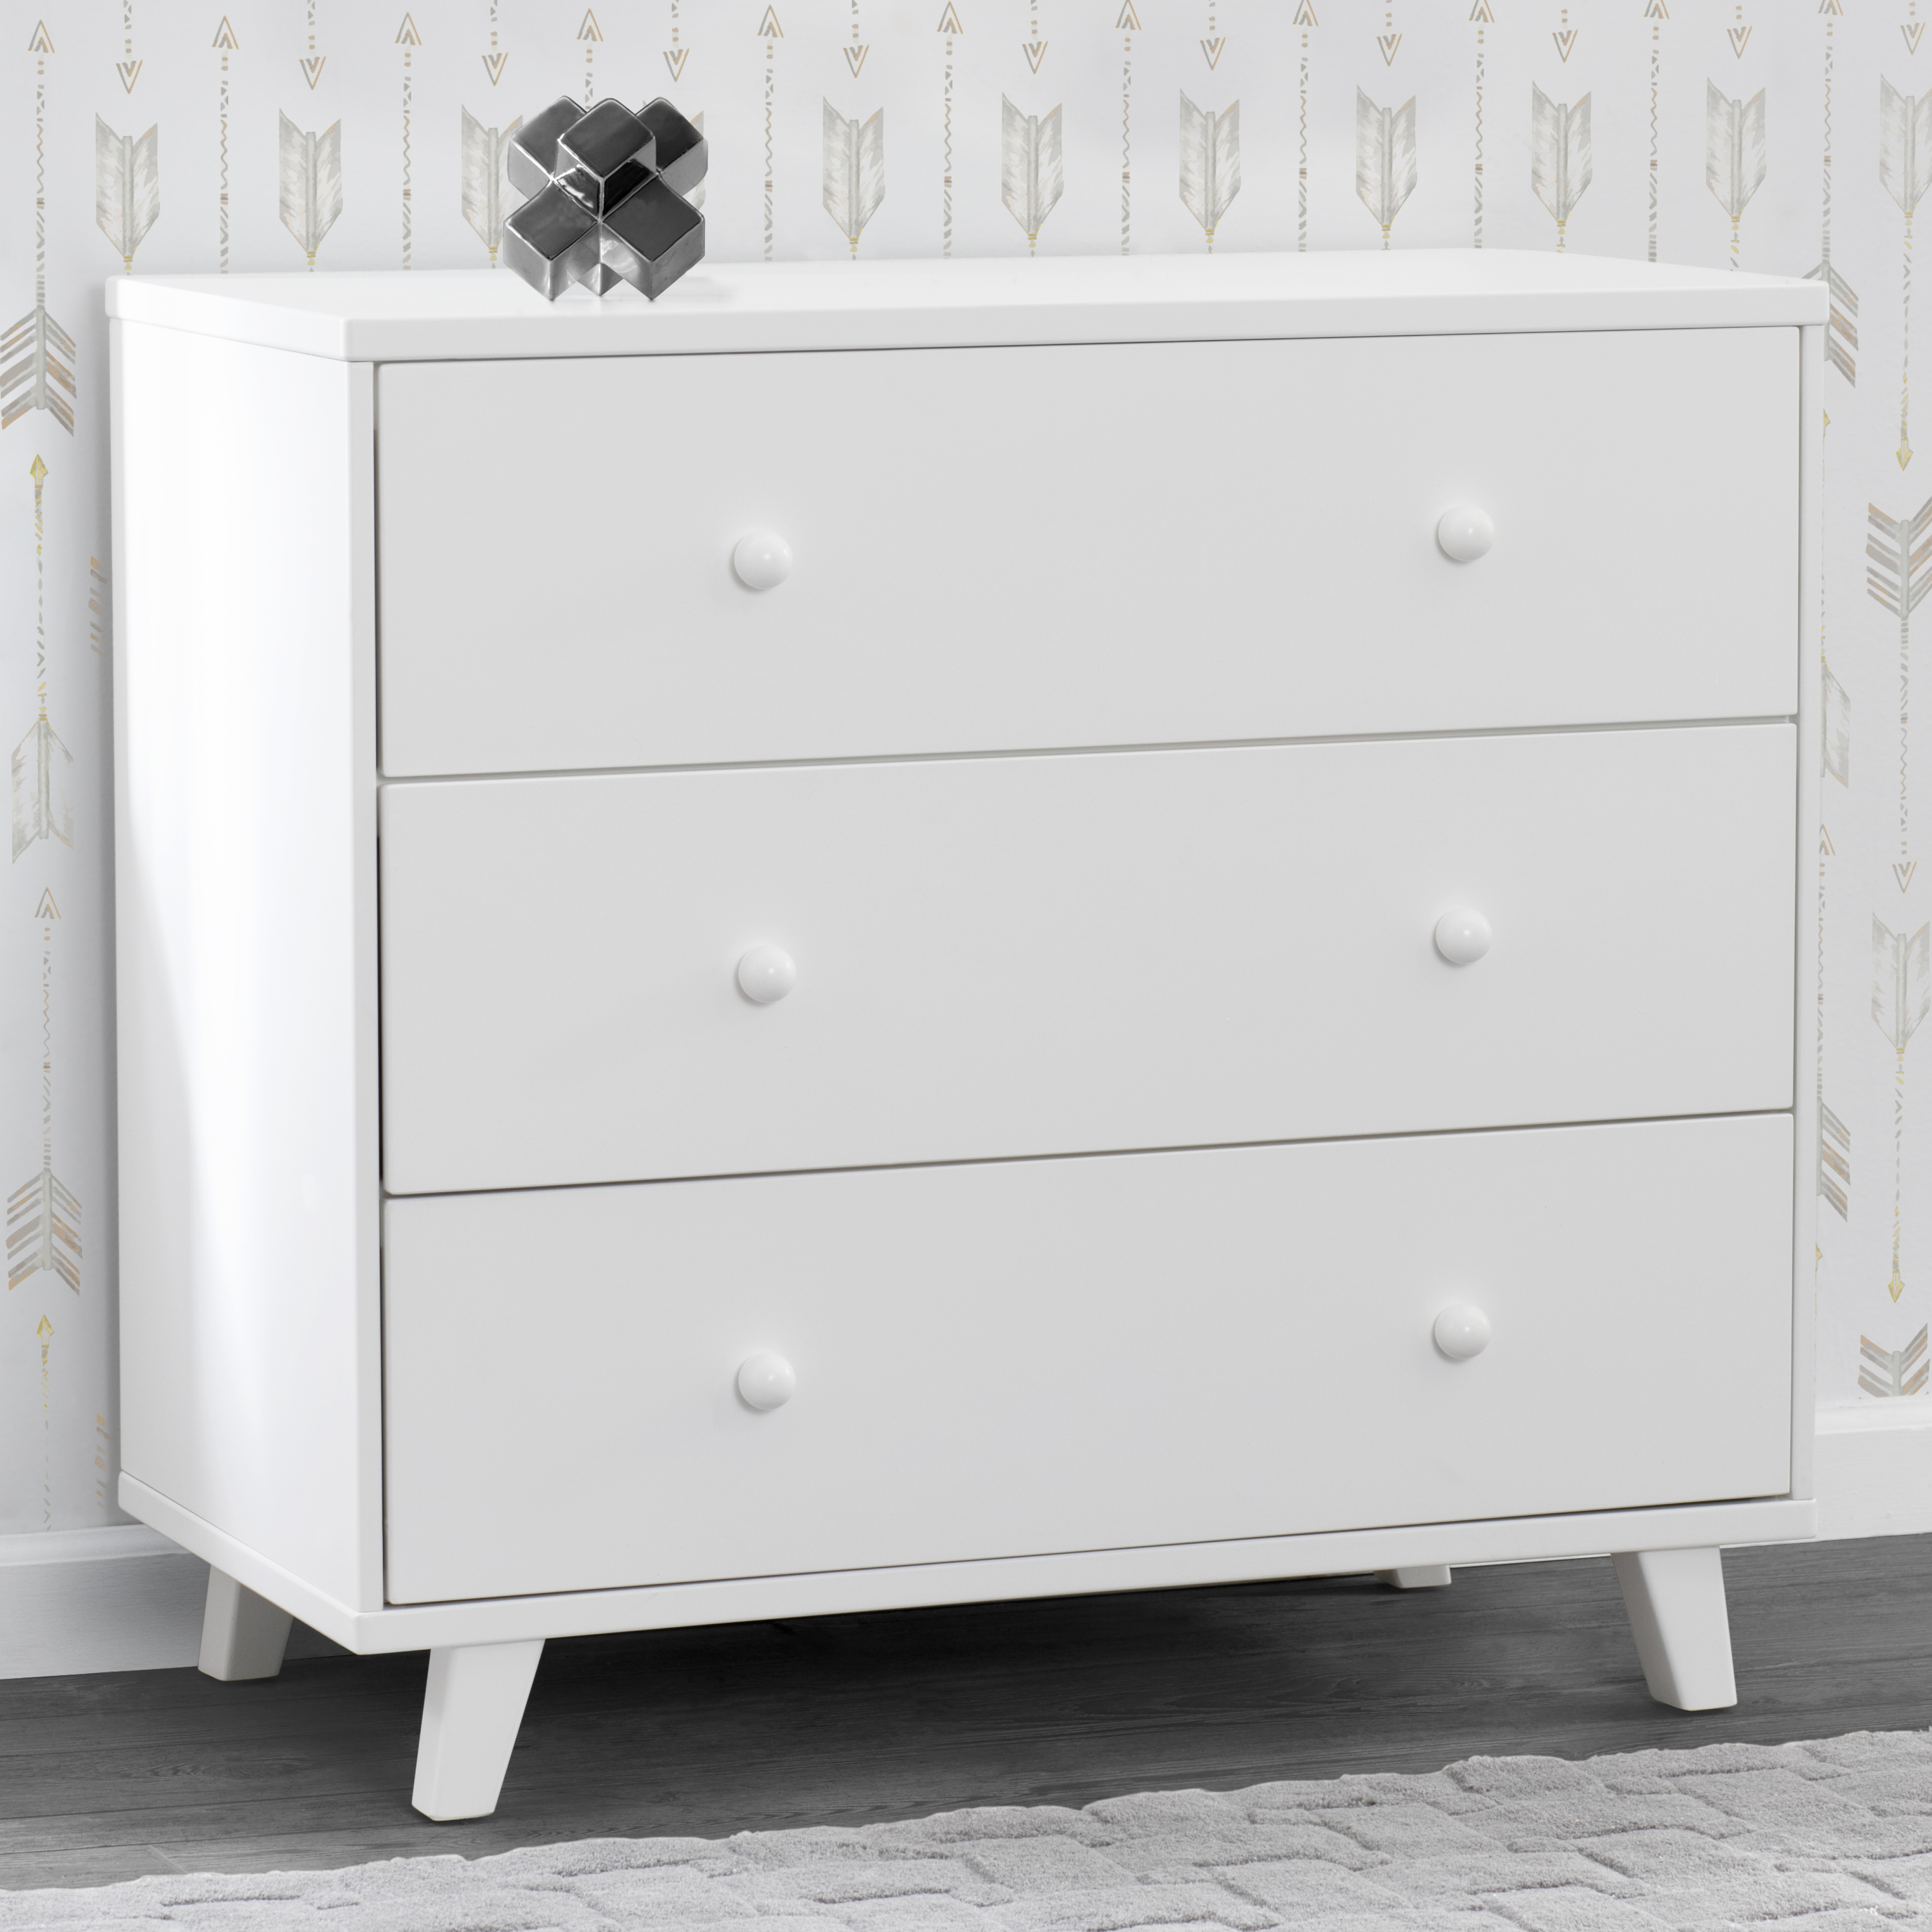 Delta Children Ava 3 Drawer Dresser with Changing Top, Greenguard Gold Certified, White - image 4 of 12